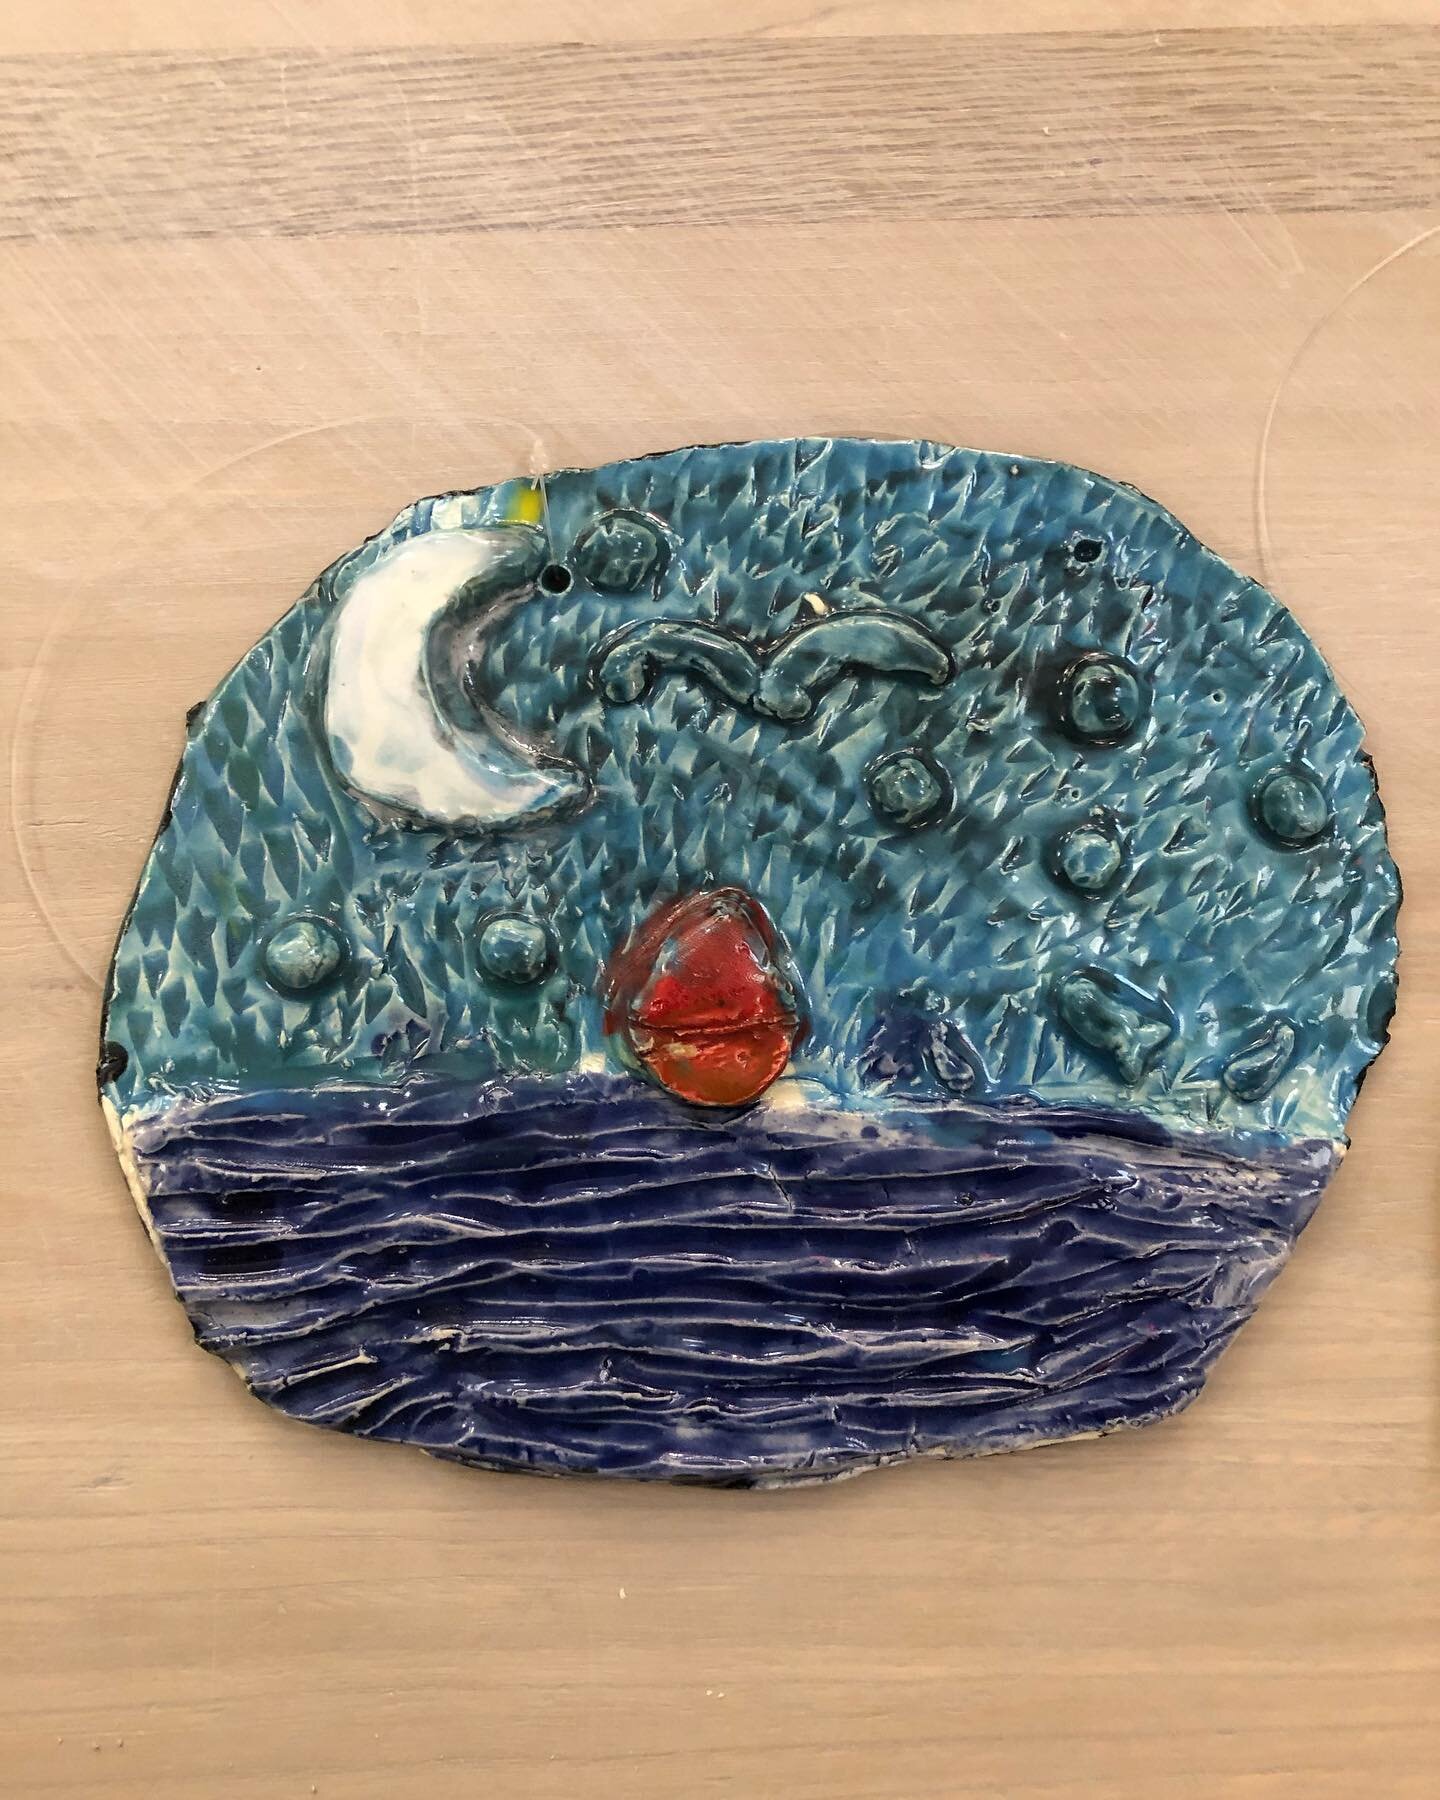 Wall pieces inspired by night time. These project started as a drawing and was then transferred to a slab. Taylor's Thursday after school class. 
#tribecaclayworks #manhattanyouth #clay #ceramics #tribeca #sculpture #ceramicart #ceramiclove #ceramica